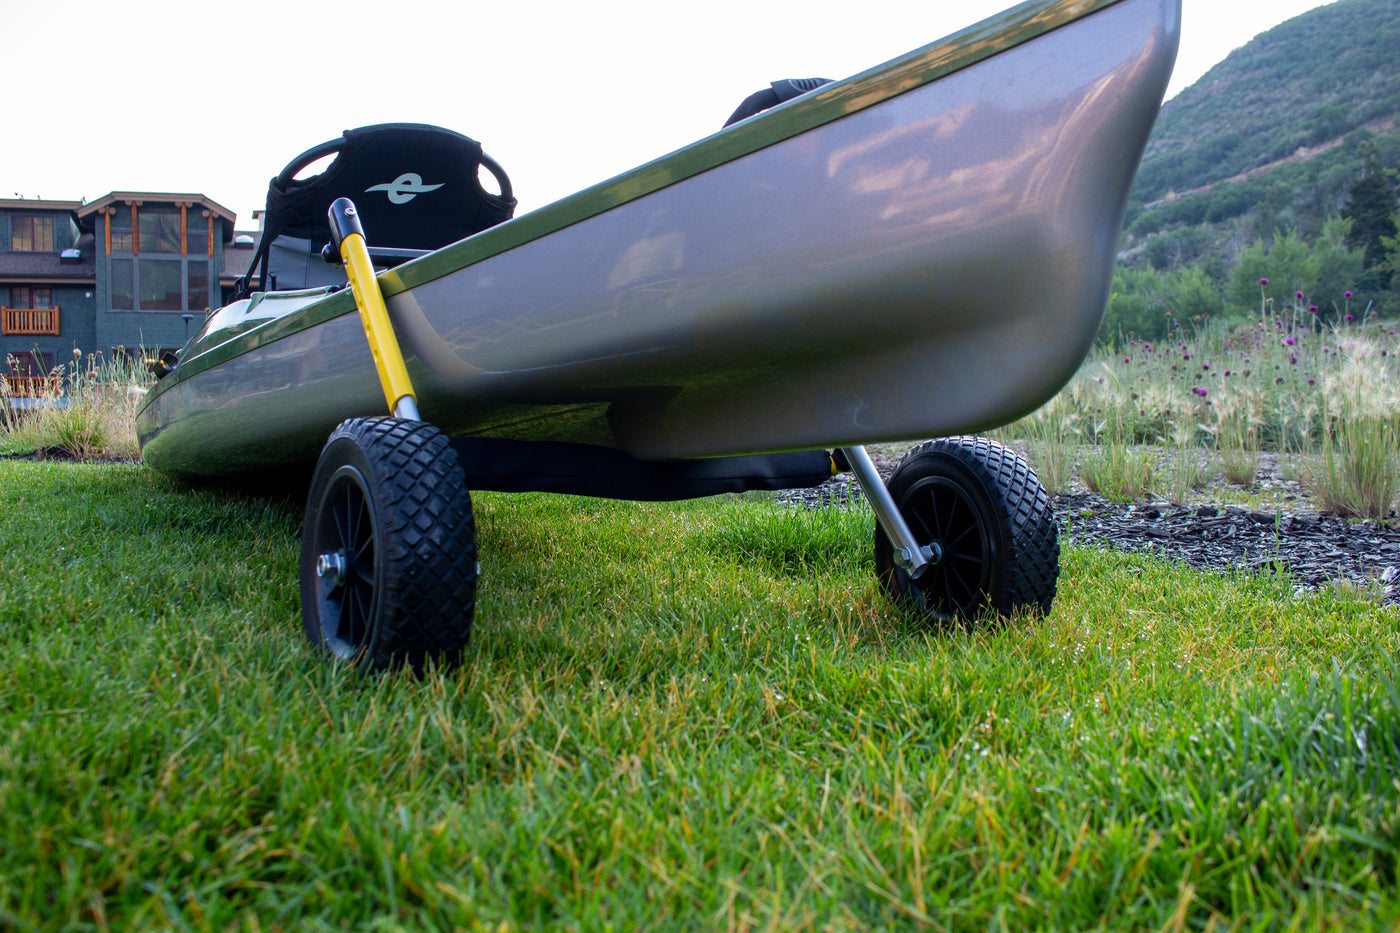 A Kayak resting in the Airless END Cart